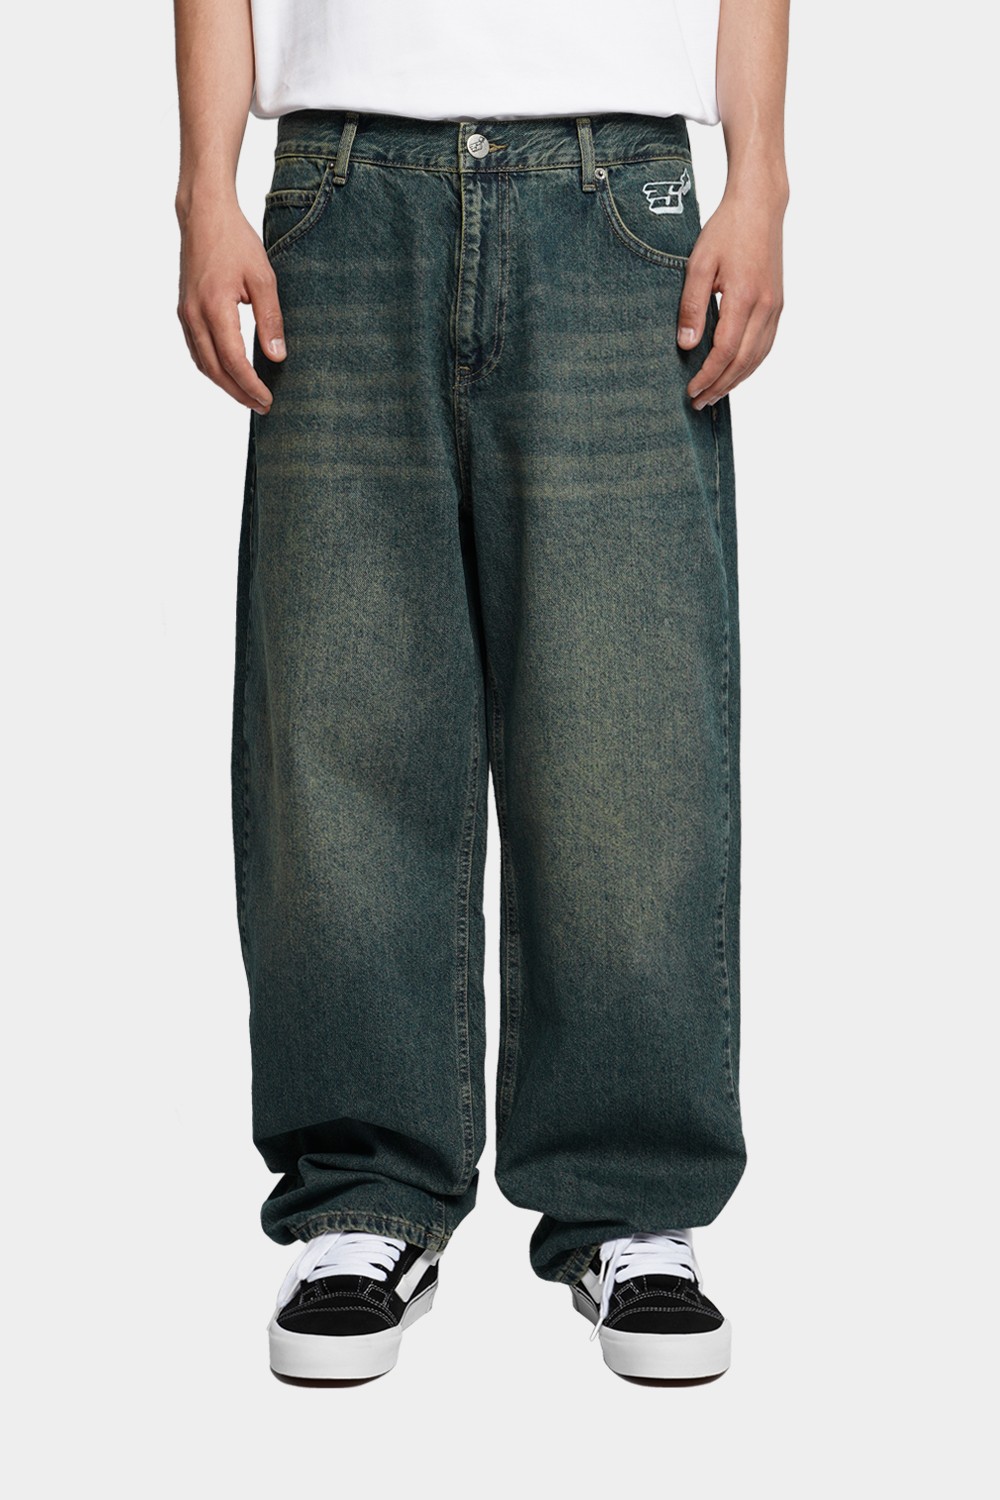 Baggy Skate Jeans - Tint Washed Green (SHBS-1)